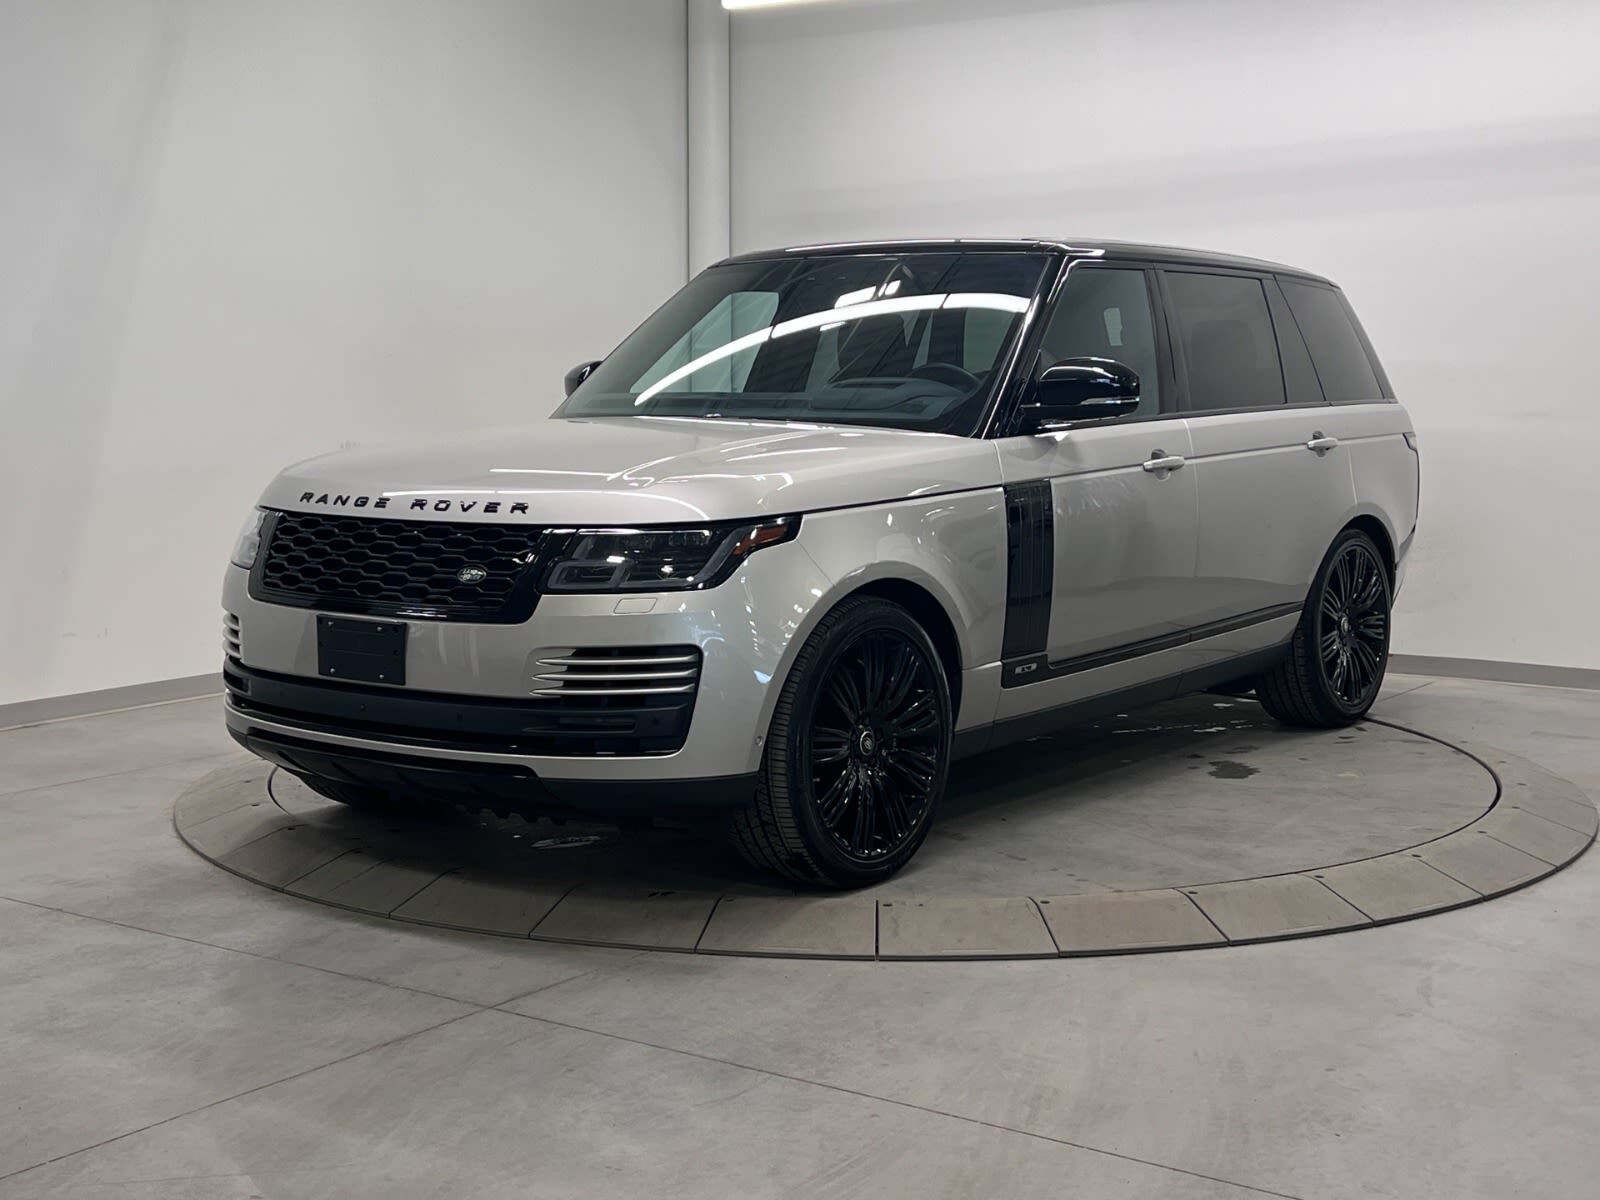 2020 Land Rover Range Rover CERTIFIED PRE OWNED RATES AS LOW AS 3.99%